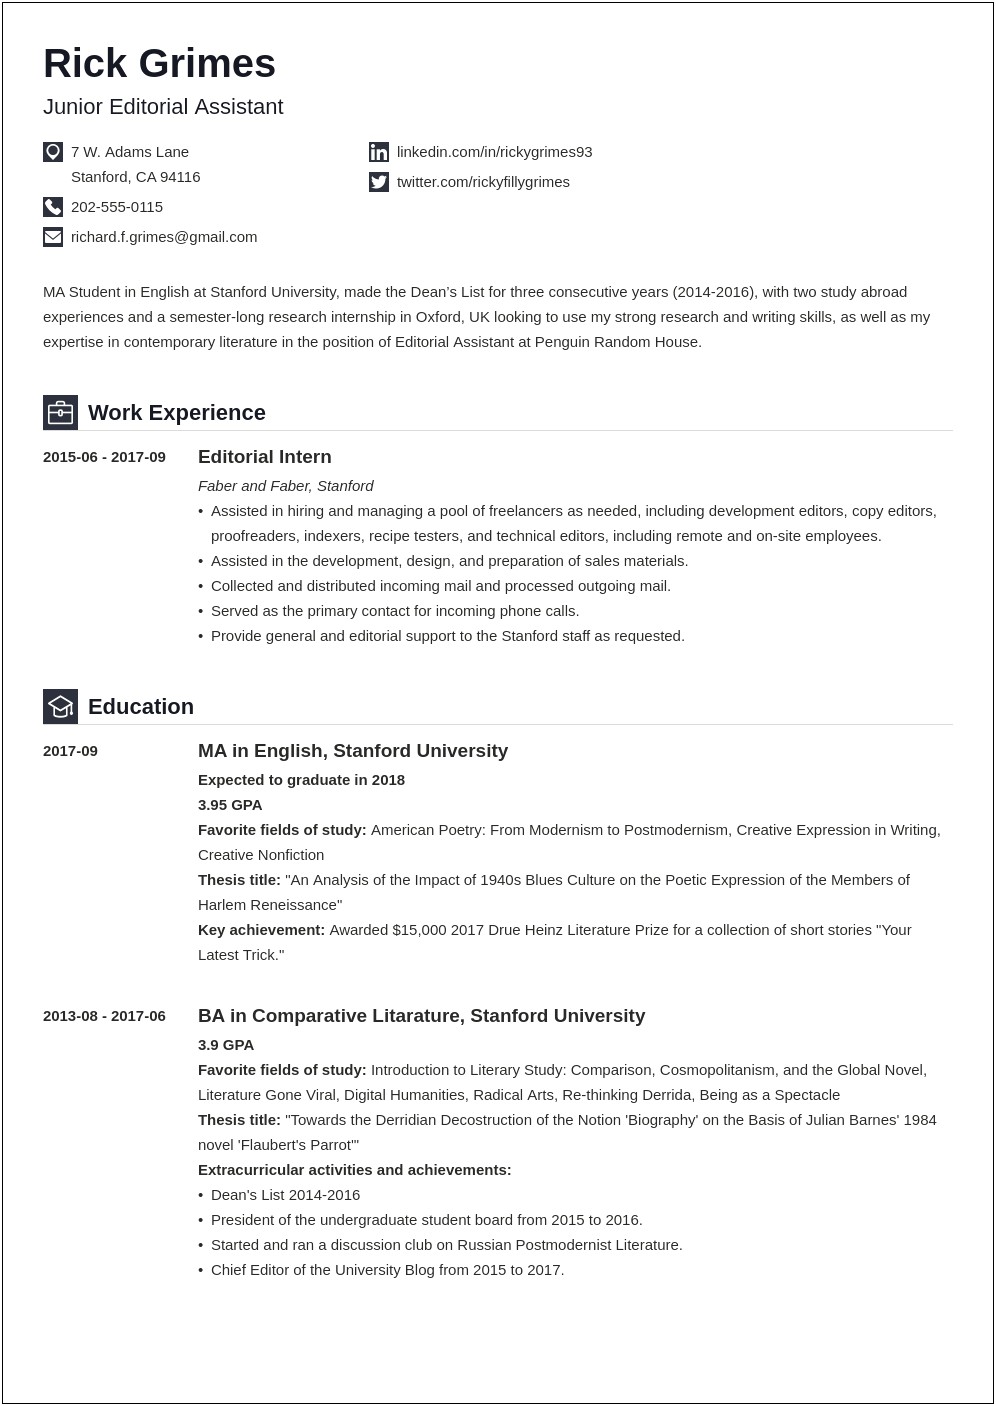 Where To Put Thesis Title In Resume